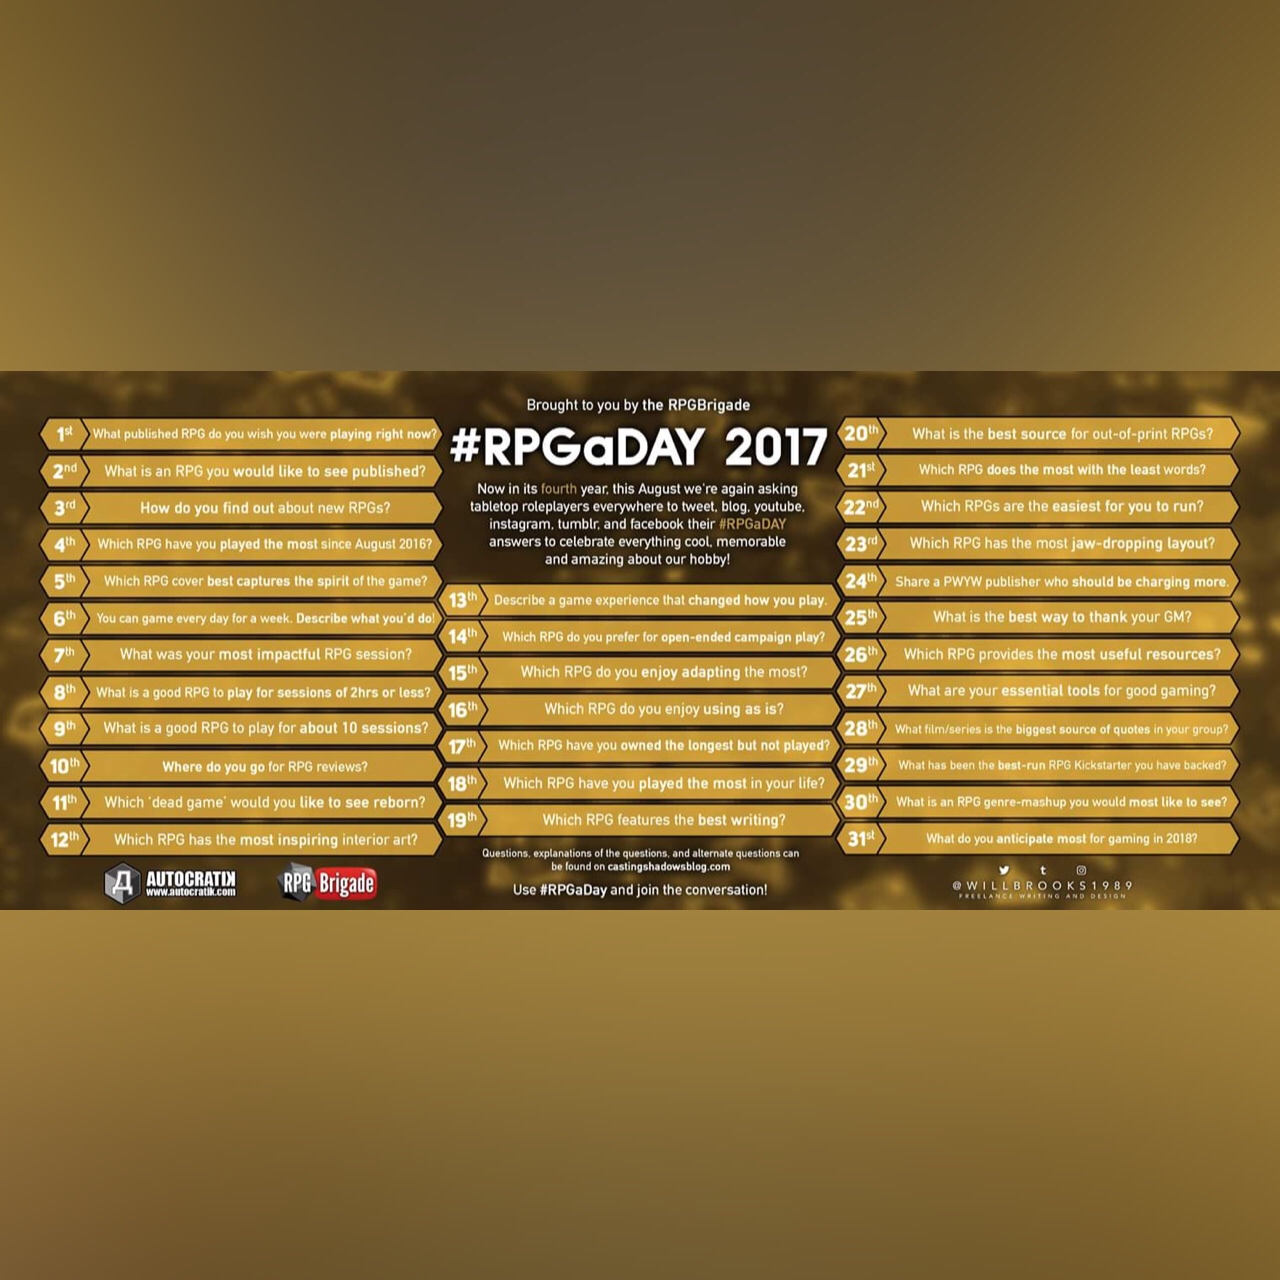 RPGaDAY 2017 August 8th What is a good RPG to play for sessions of 2 hours or less?